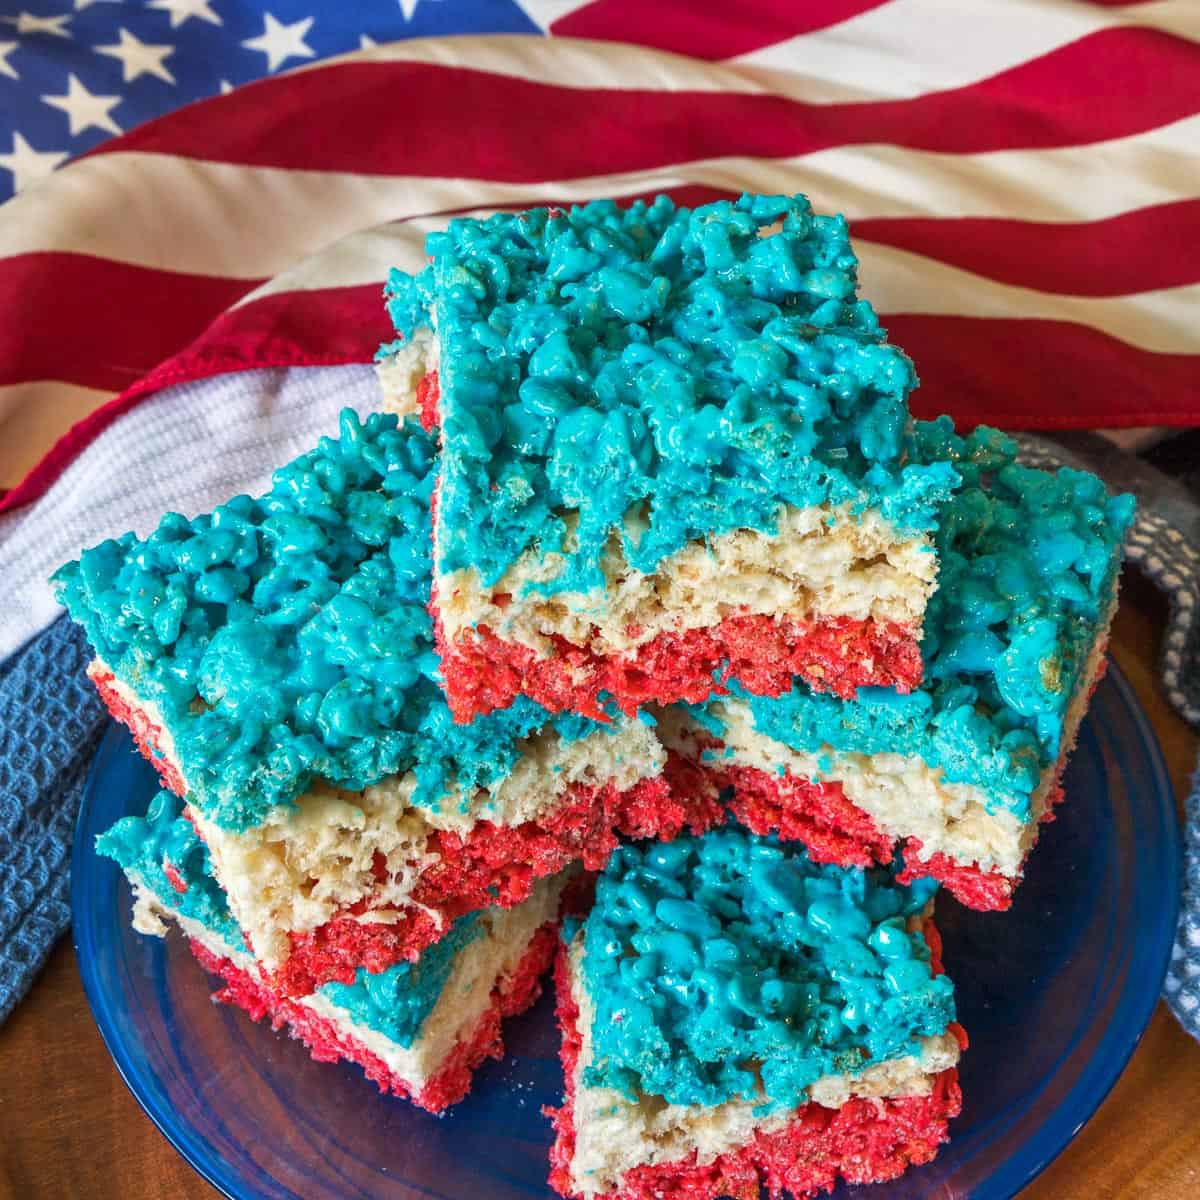 Red White and Blue Rice Krispie Treats